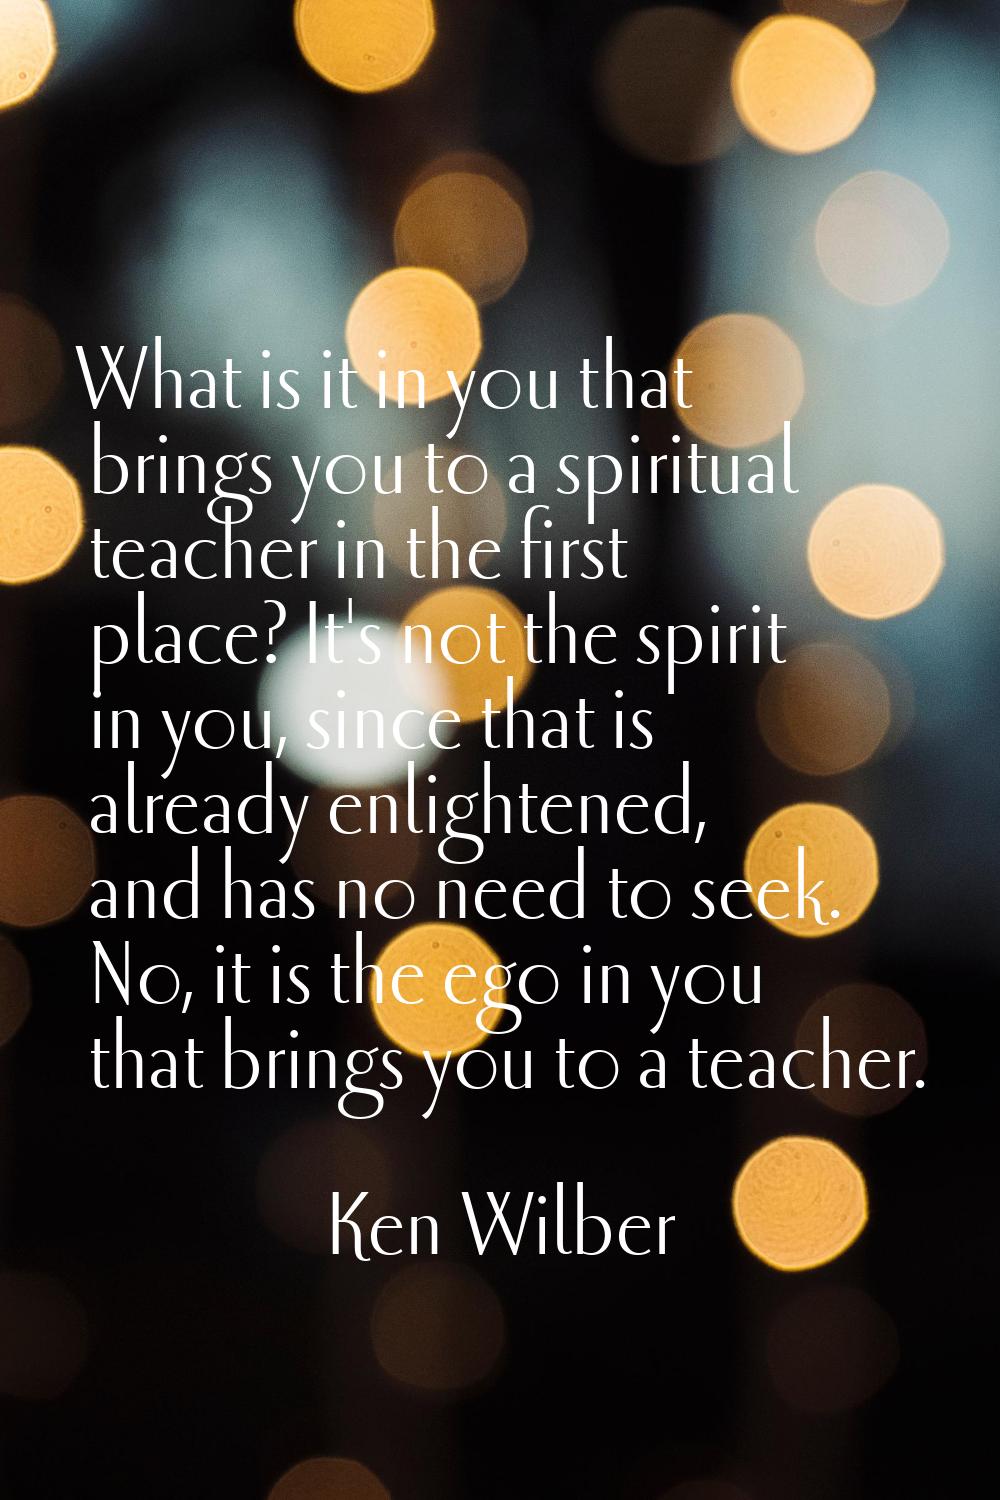 What is it in you that brings you to a spiritual teacher in the first place? It's not the spirit in